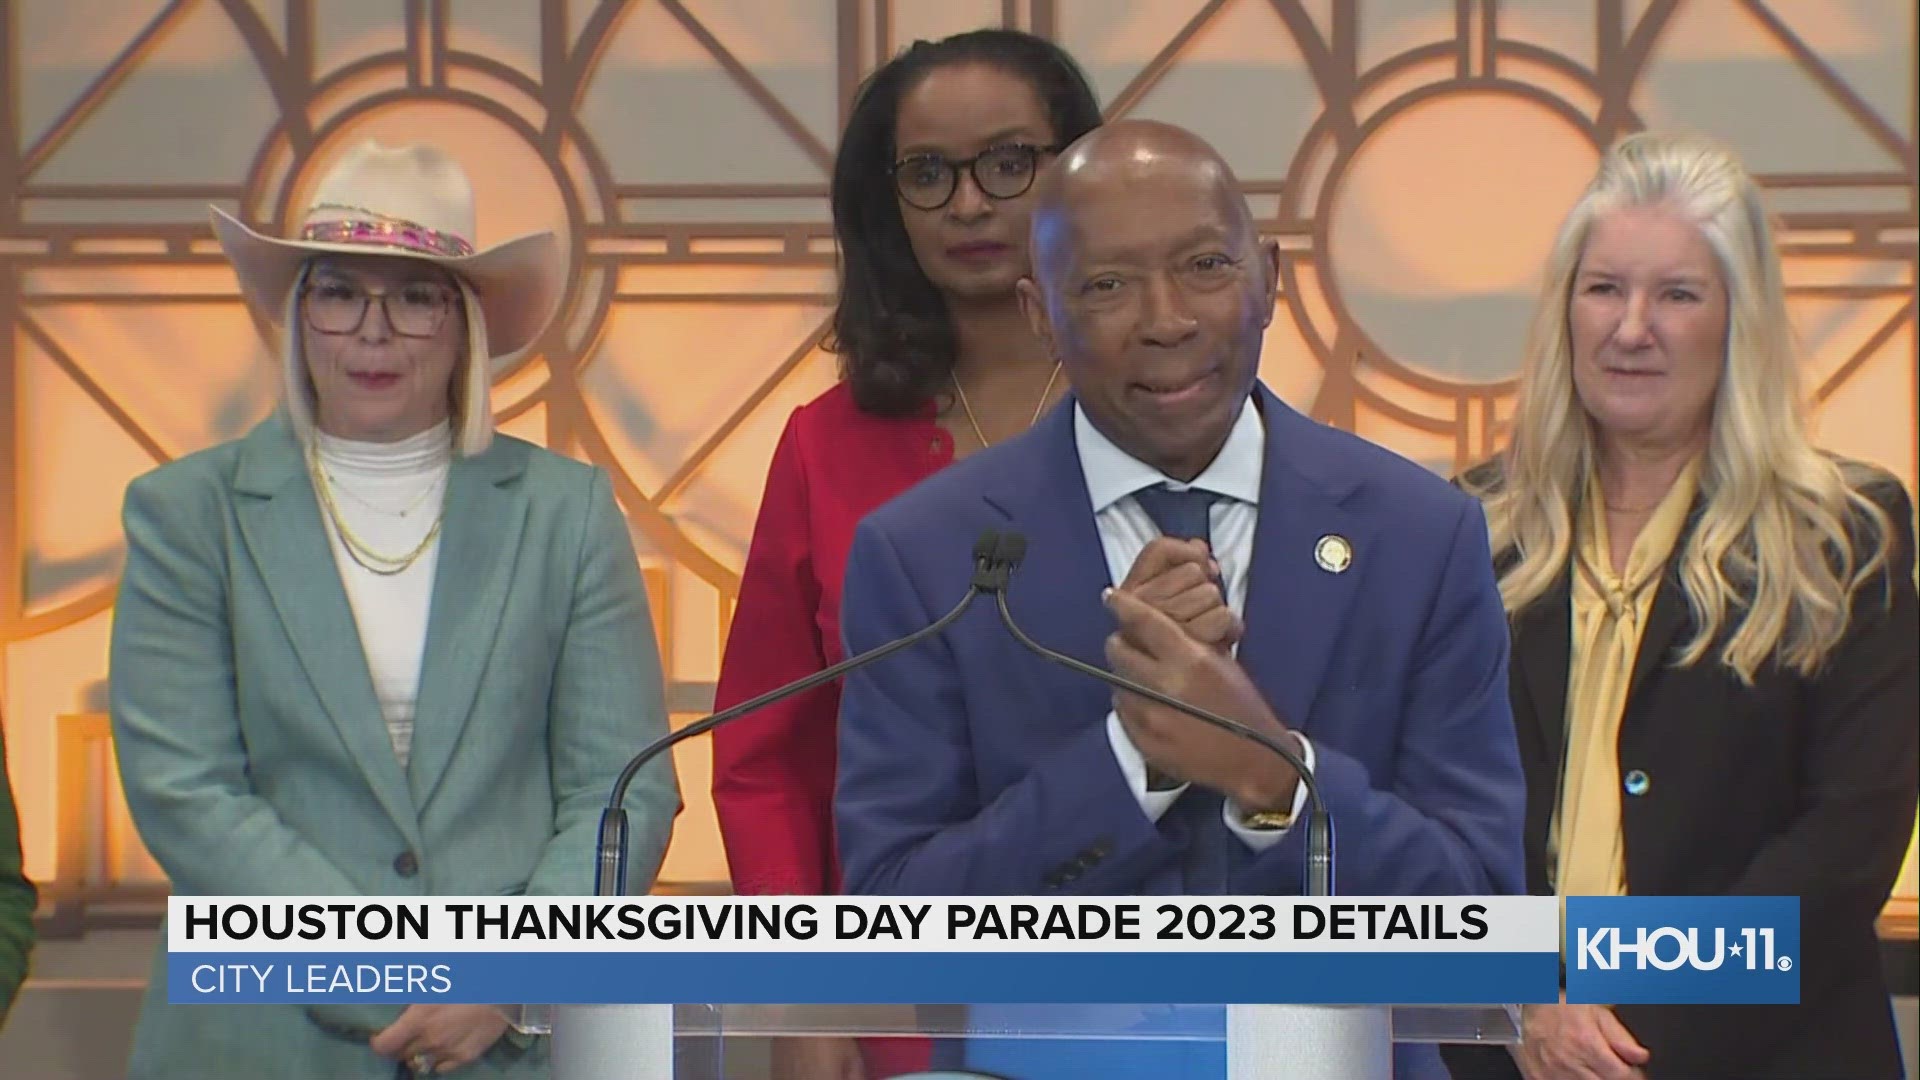 The City of Houston announced the details of its 2023 Thanksgiving Day Parade on Thursday.